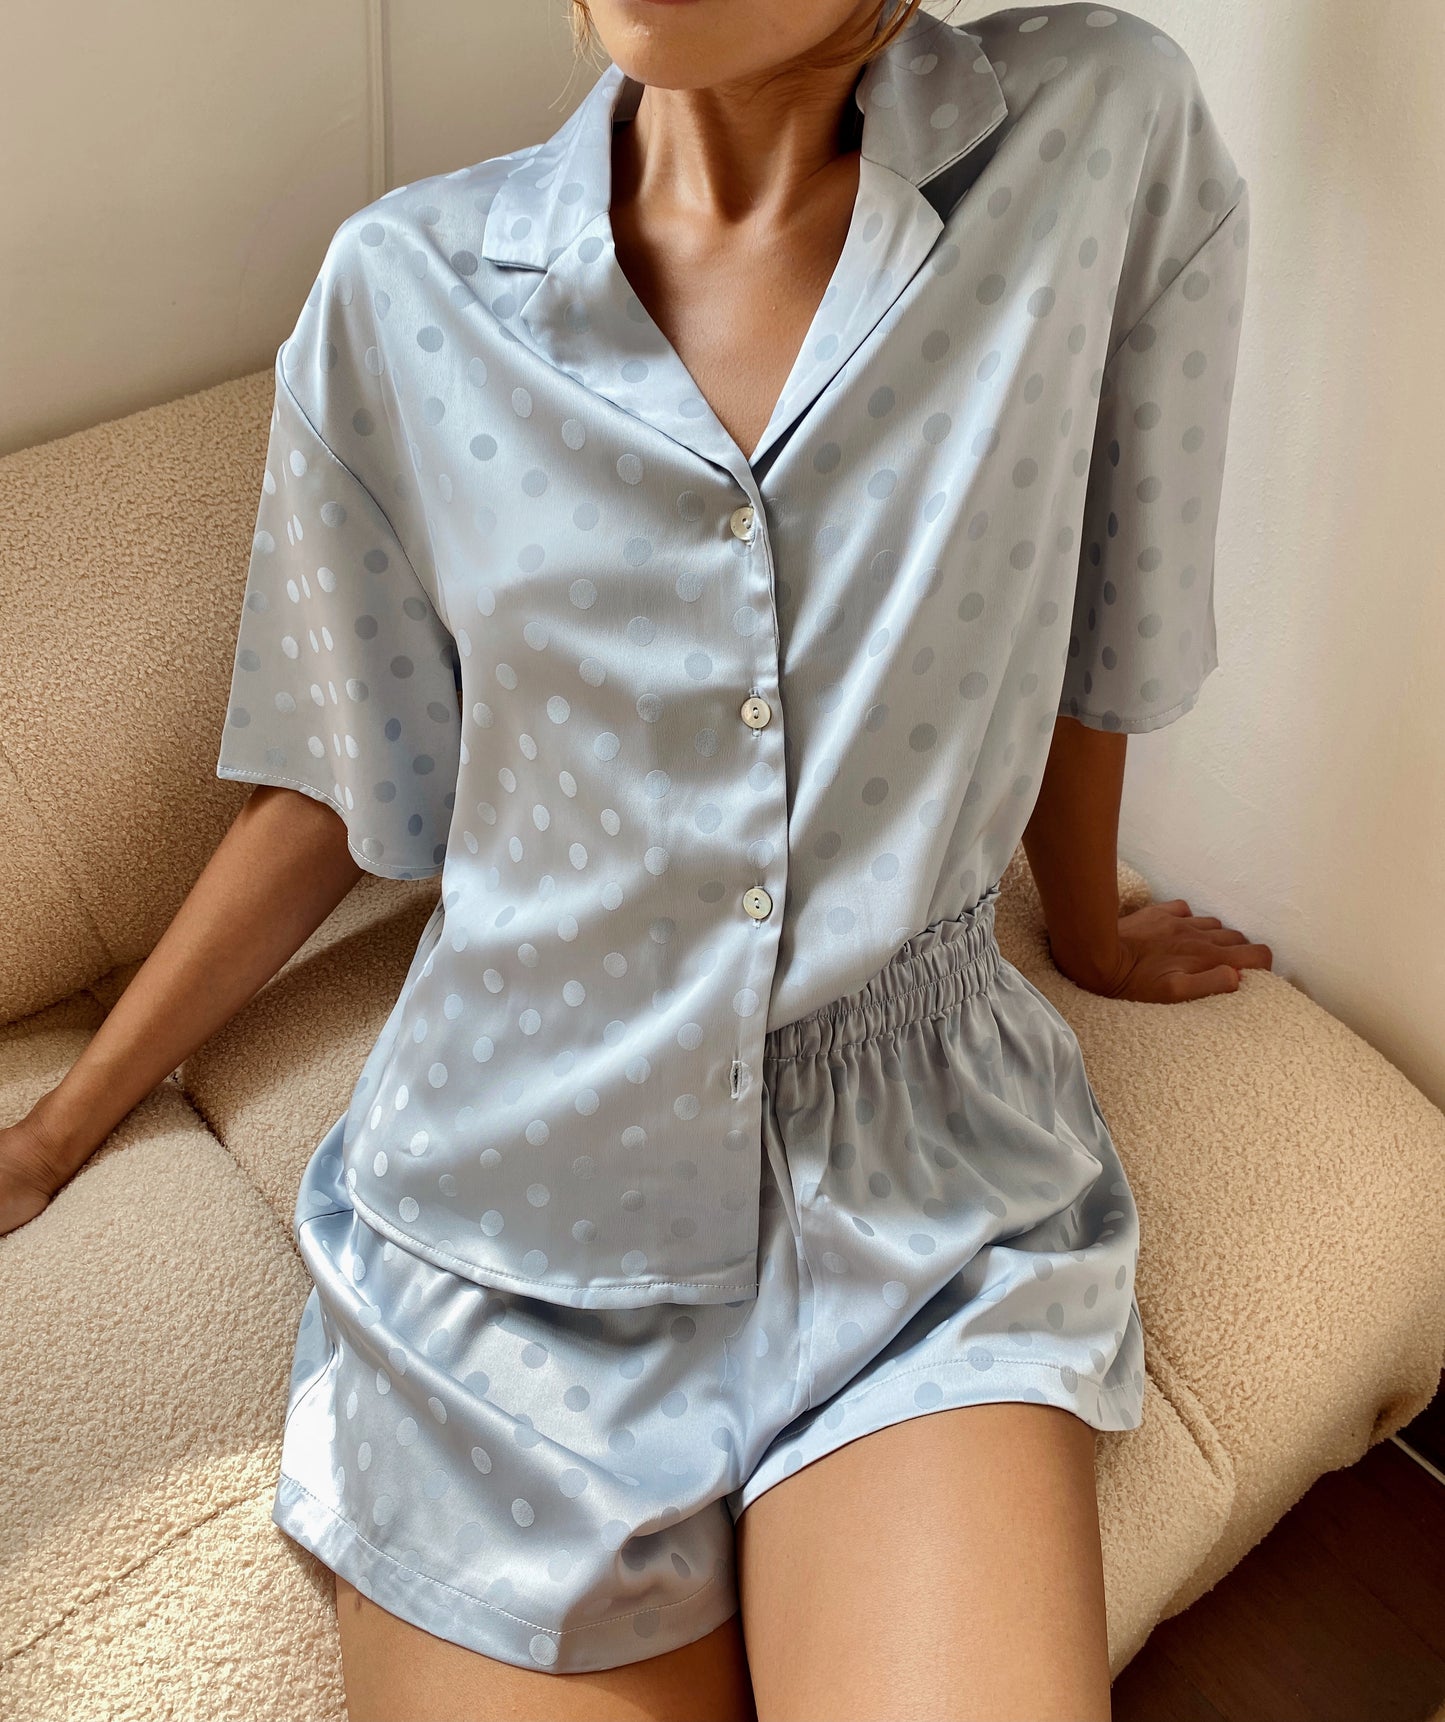 Feel stylish and cute in this set of Julia Silk Pyjamas. An affordable and luxurious pyjamas crafted for comfort in your everyday loungewear. Snag a piece of this pyjama set, an essential piece in your sleepwear. Made from 100% smooth and soft viscose silk.